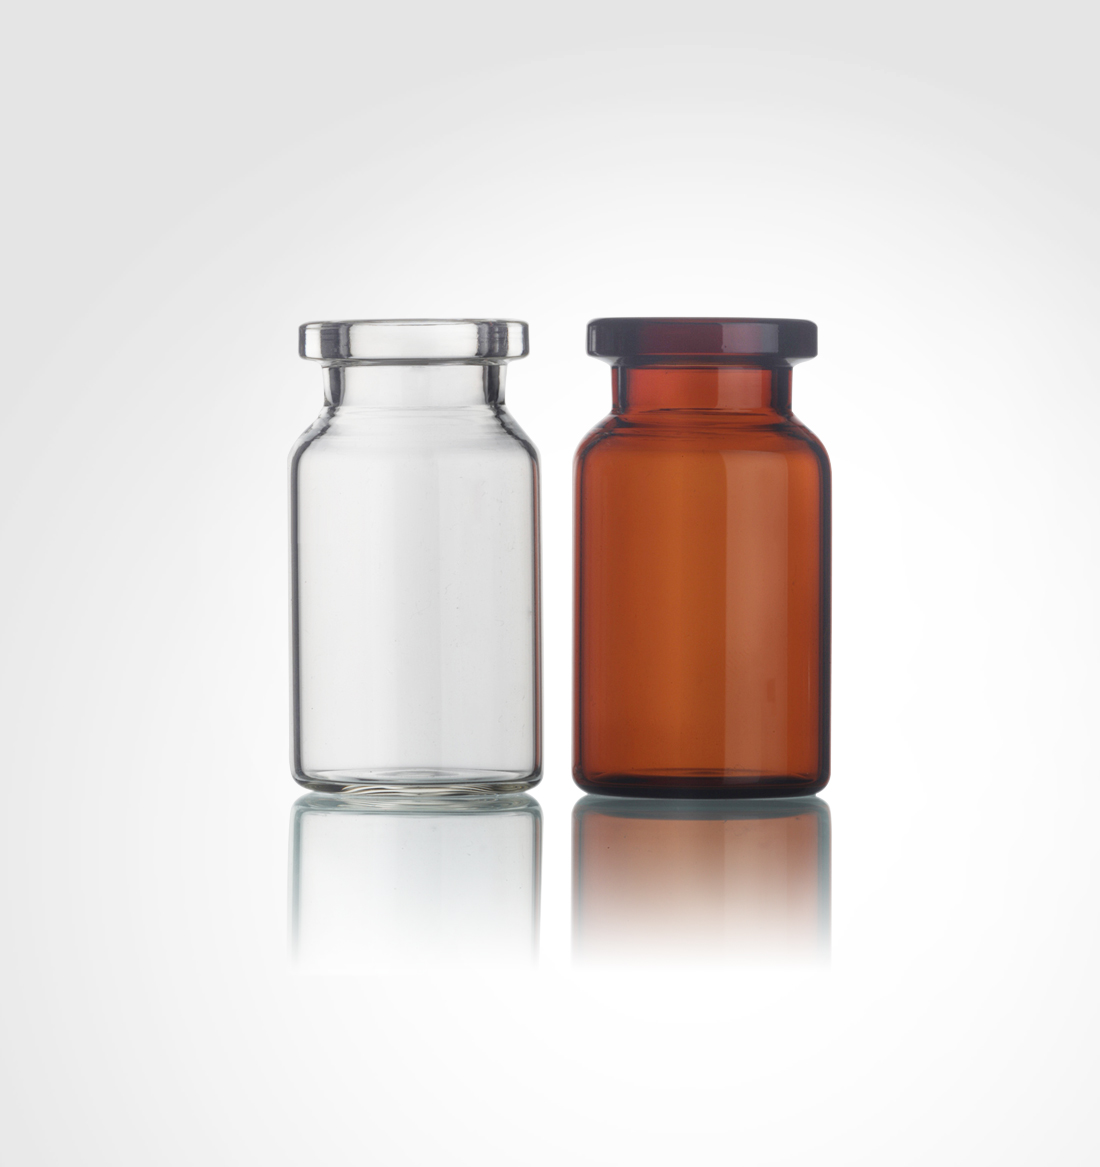 njection vials made of neutral borosilicate glass tubing.jpg